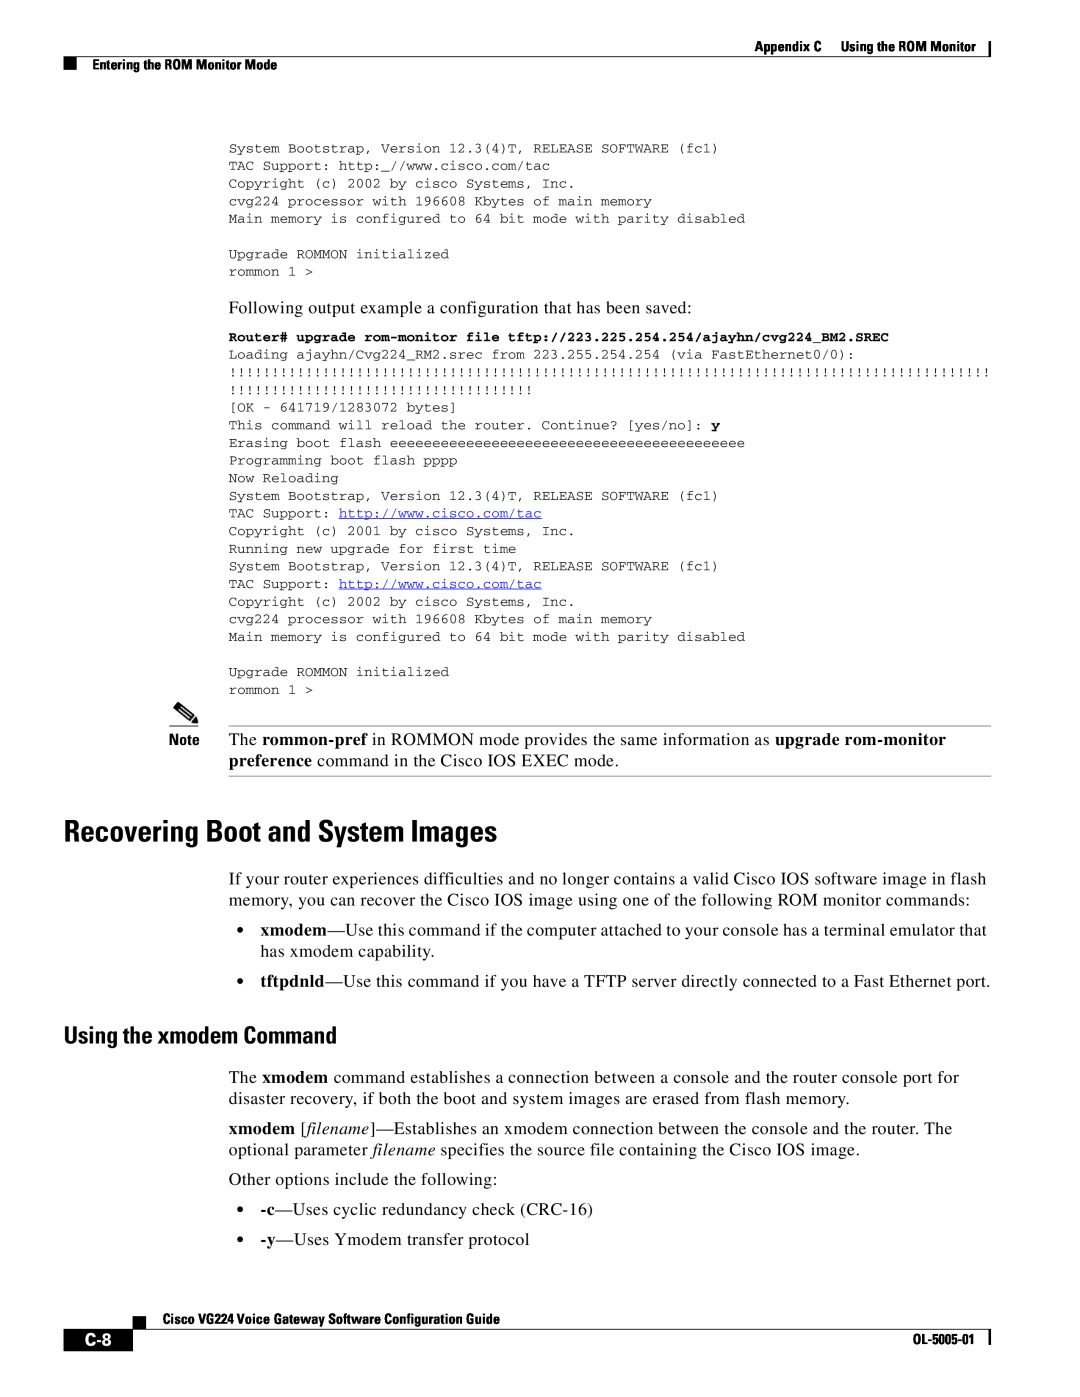 Cisco Systems VG224 manual Recovering Boot and System Images, Using the xmodem Command 